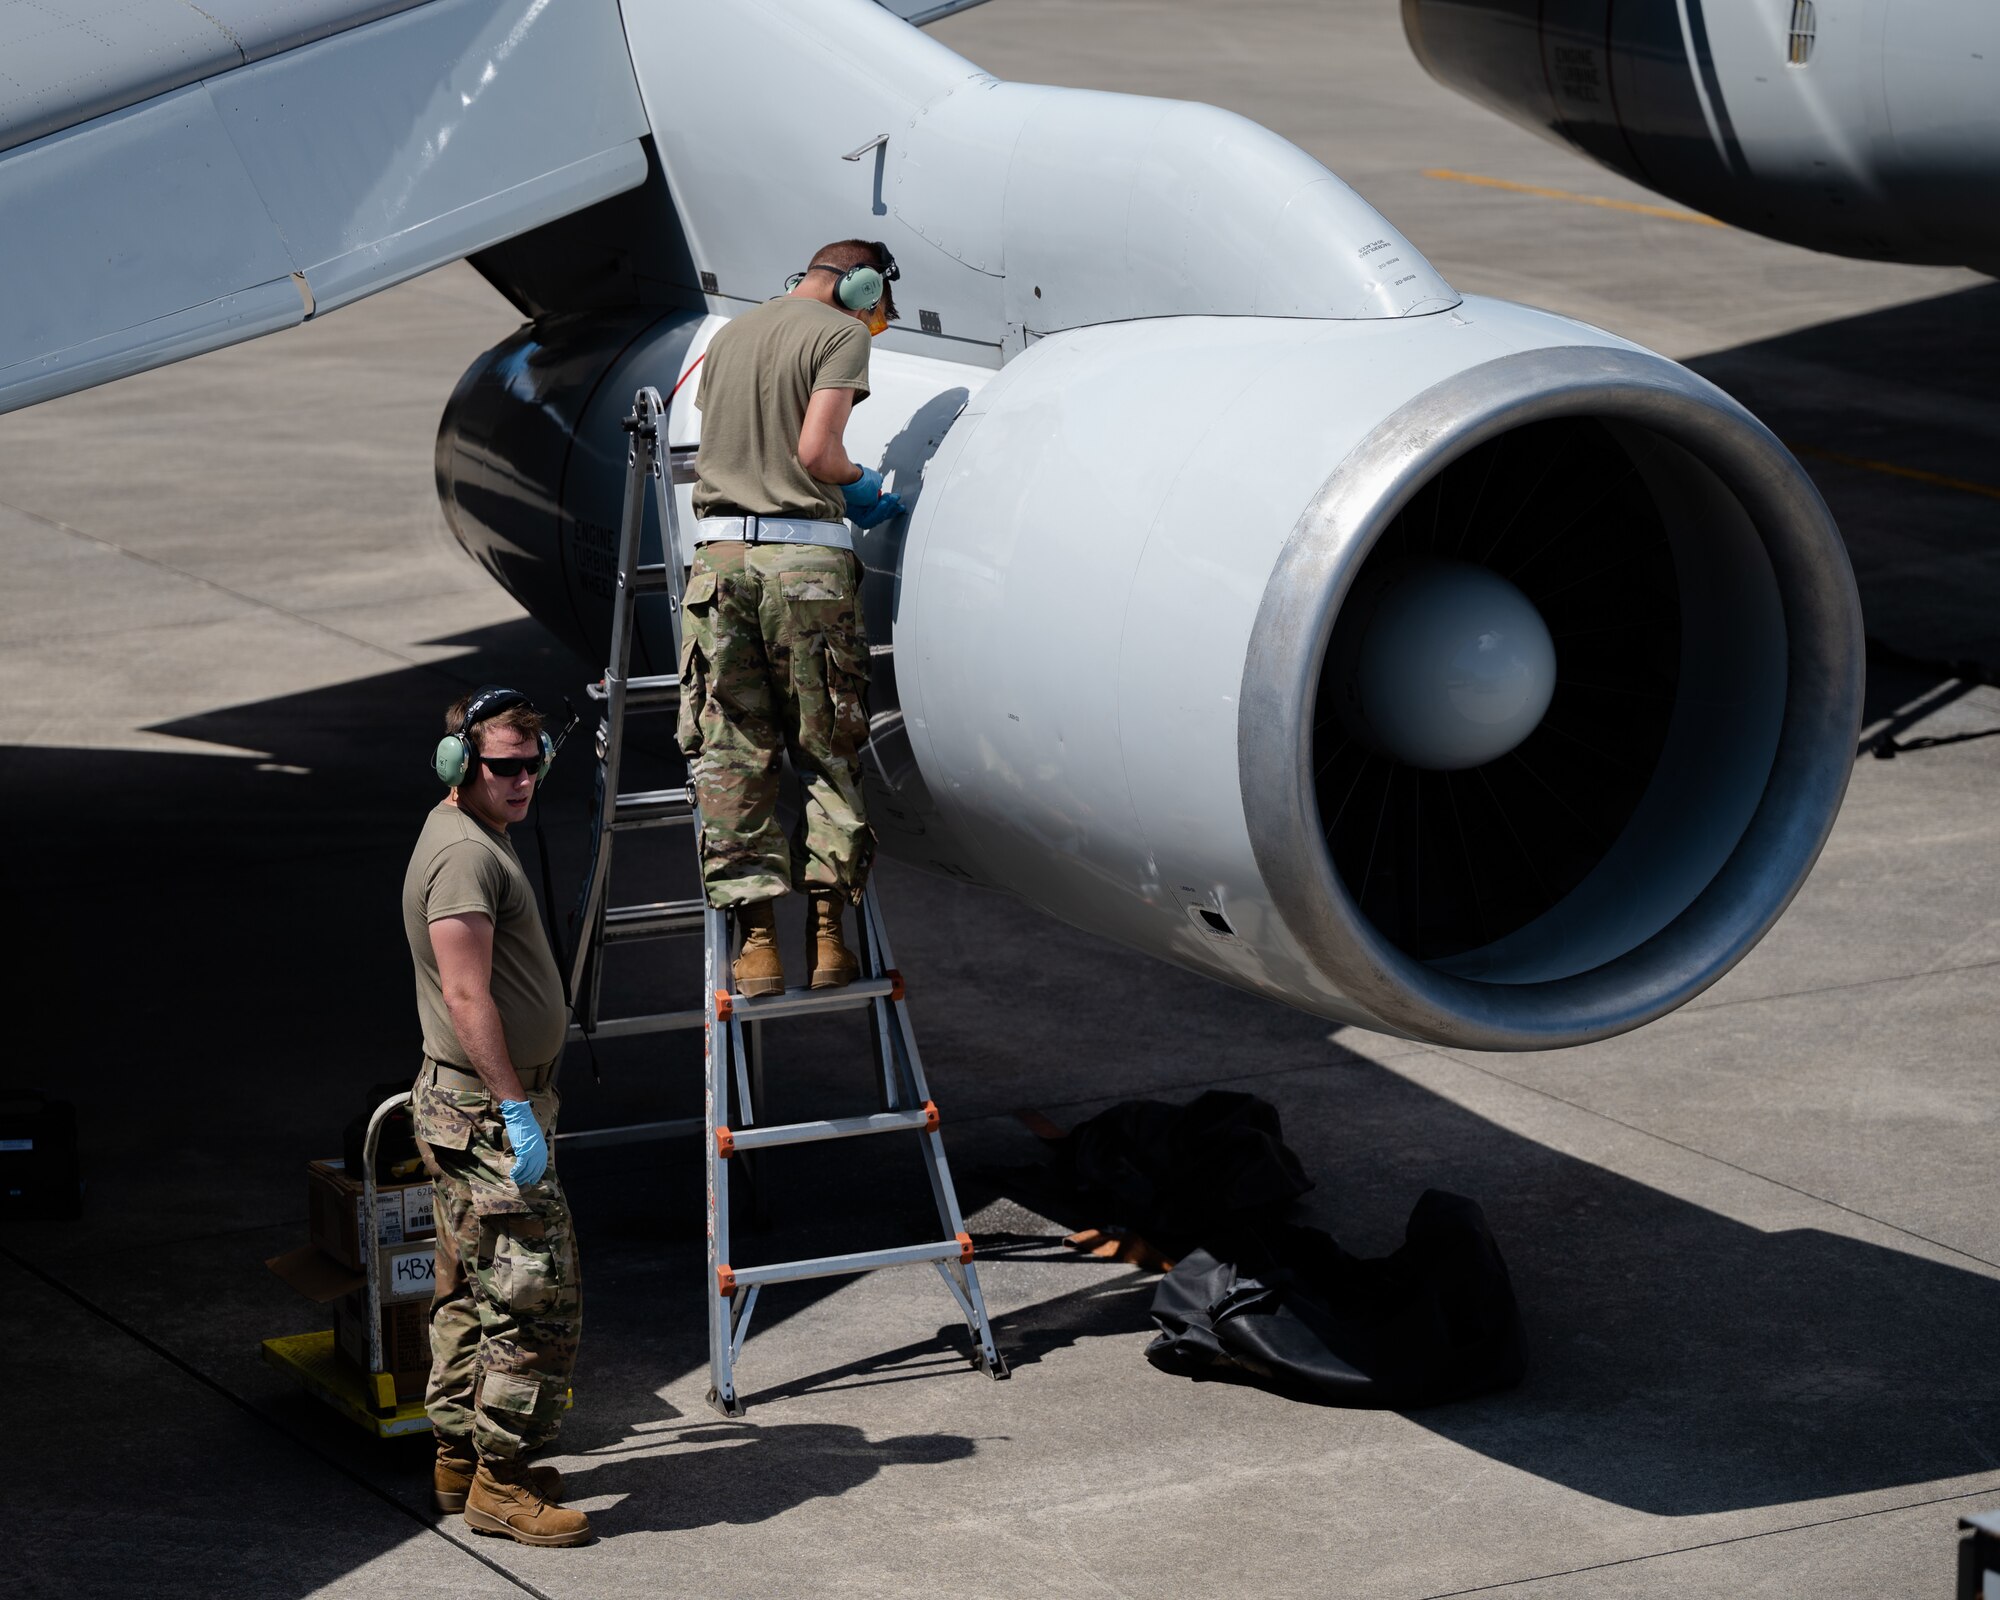 U.S. Air Force Airman 1st Class Andrew Foust, left, 961st Aircraft Maintenance Unit aerospace propulsion apprentice, and Airman 1st Class Trevor Fisher, right, 961st AMU aerospace propulsion apprentice, inspect an E-3 Sentry engine at Kadena Air Base, Japan, Aug. 30, 2021. The 961st AMU are responsible for ensuring E-3 Sentries are capable of protecting U.S. and coalition force interests in the INDO-Pacific region. (U.S. Air Force photo by Airman 1st Class Stephen Pulter)